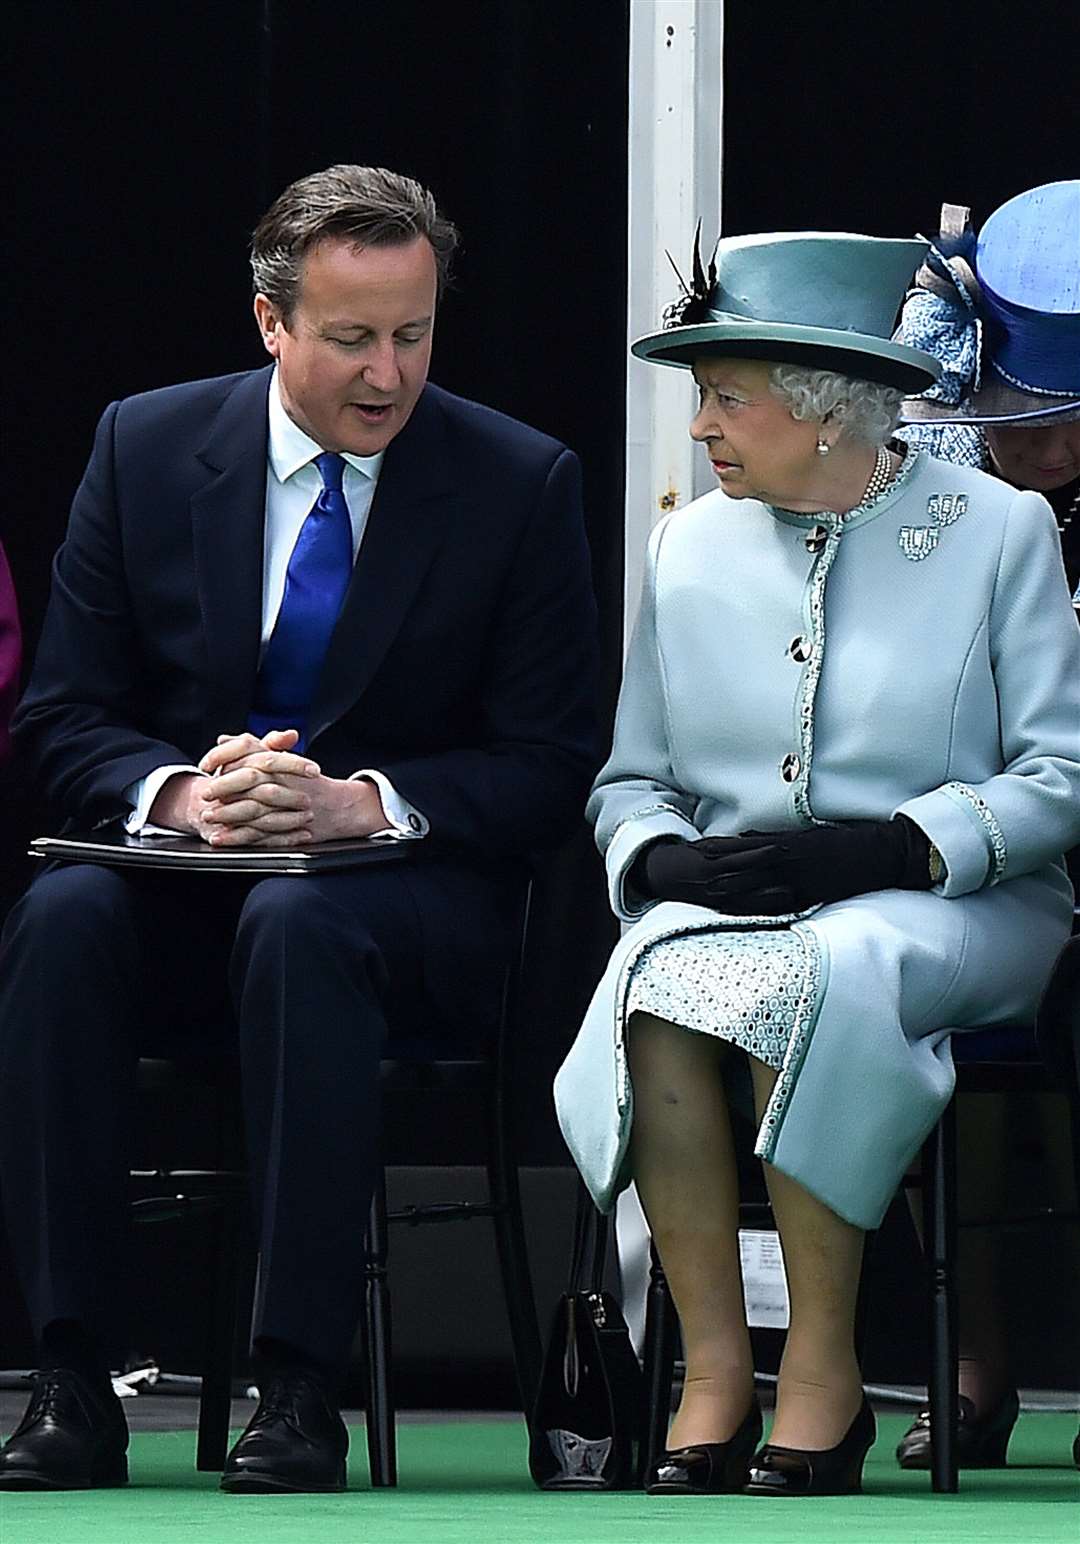 David Cameron and the Queen attending a Magna Carta 800th anniversary commemoration event in 2015 (Ben Stansall/PA)